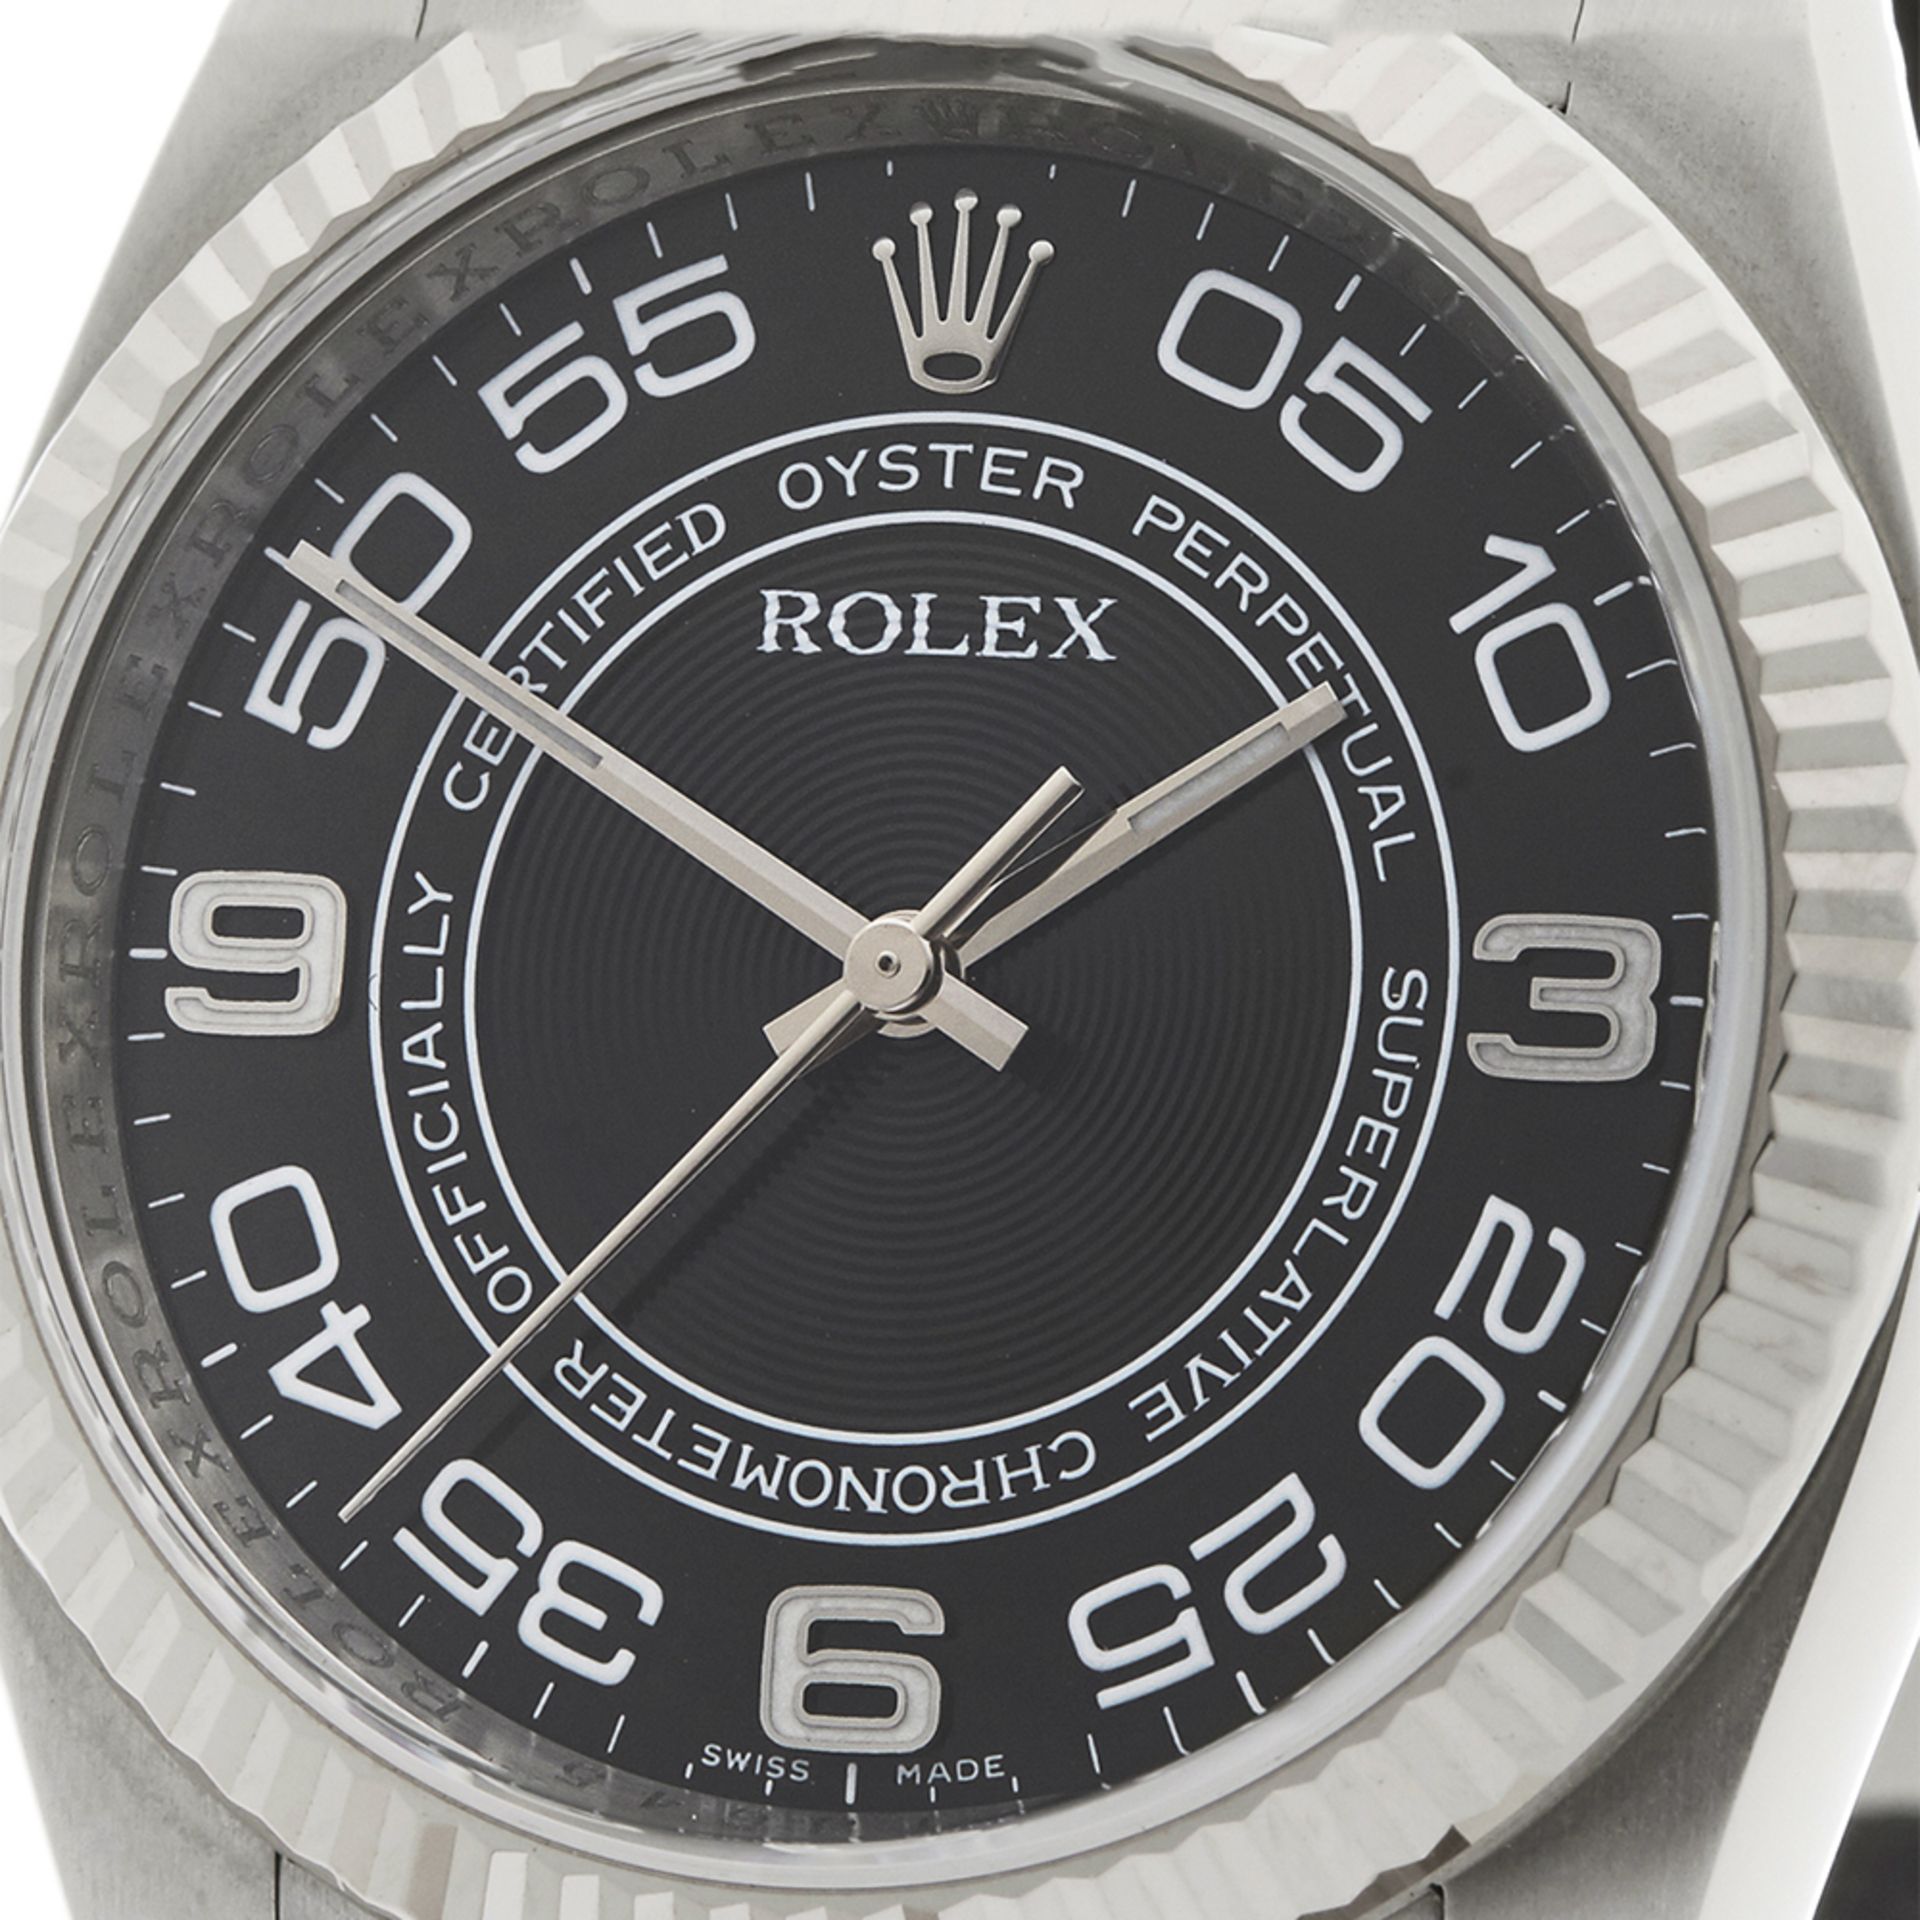 Rolex Oyster Perpetual 36mm Stainless Steel - 116034